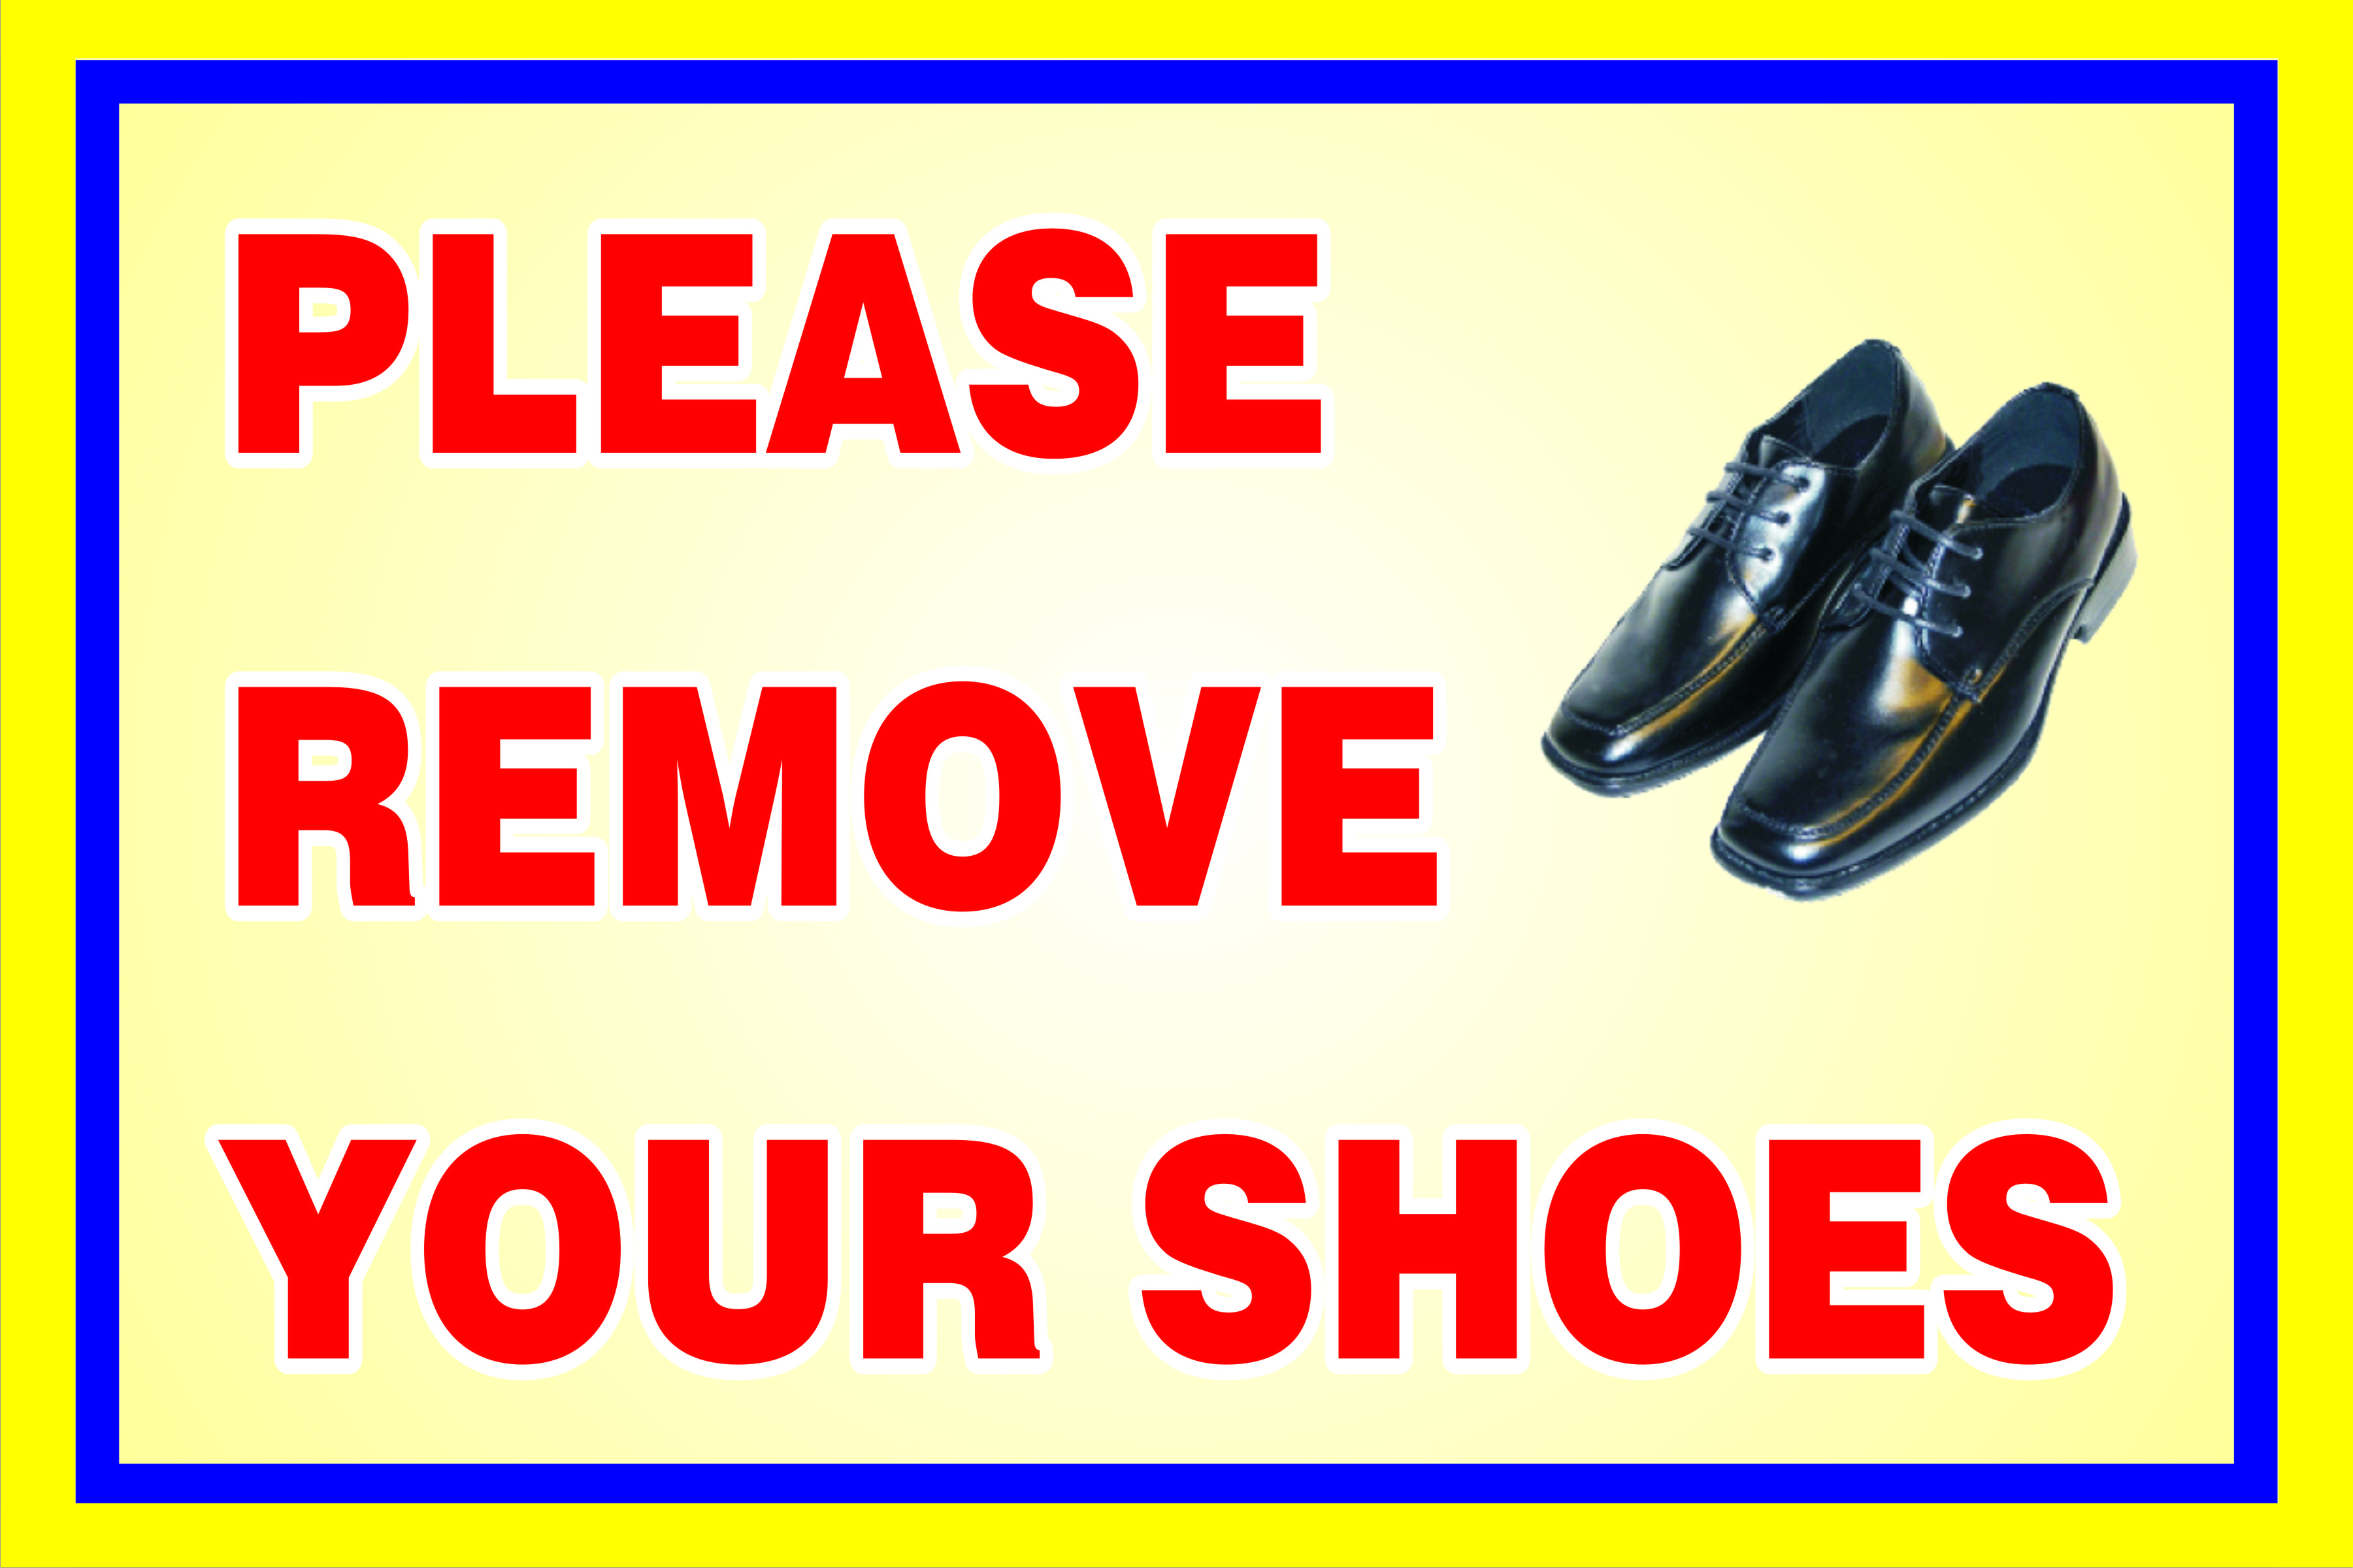 amazon-please-remove-your-shoes-thank-you-6w-x-3-5h-inches-vinyl